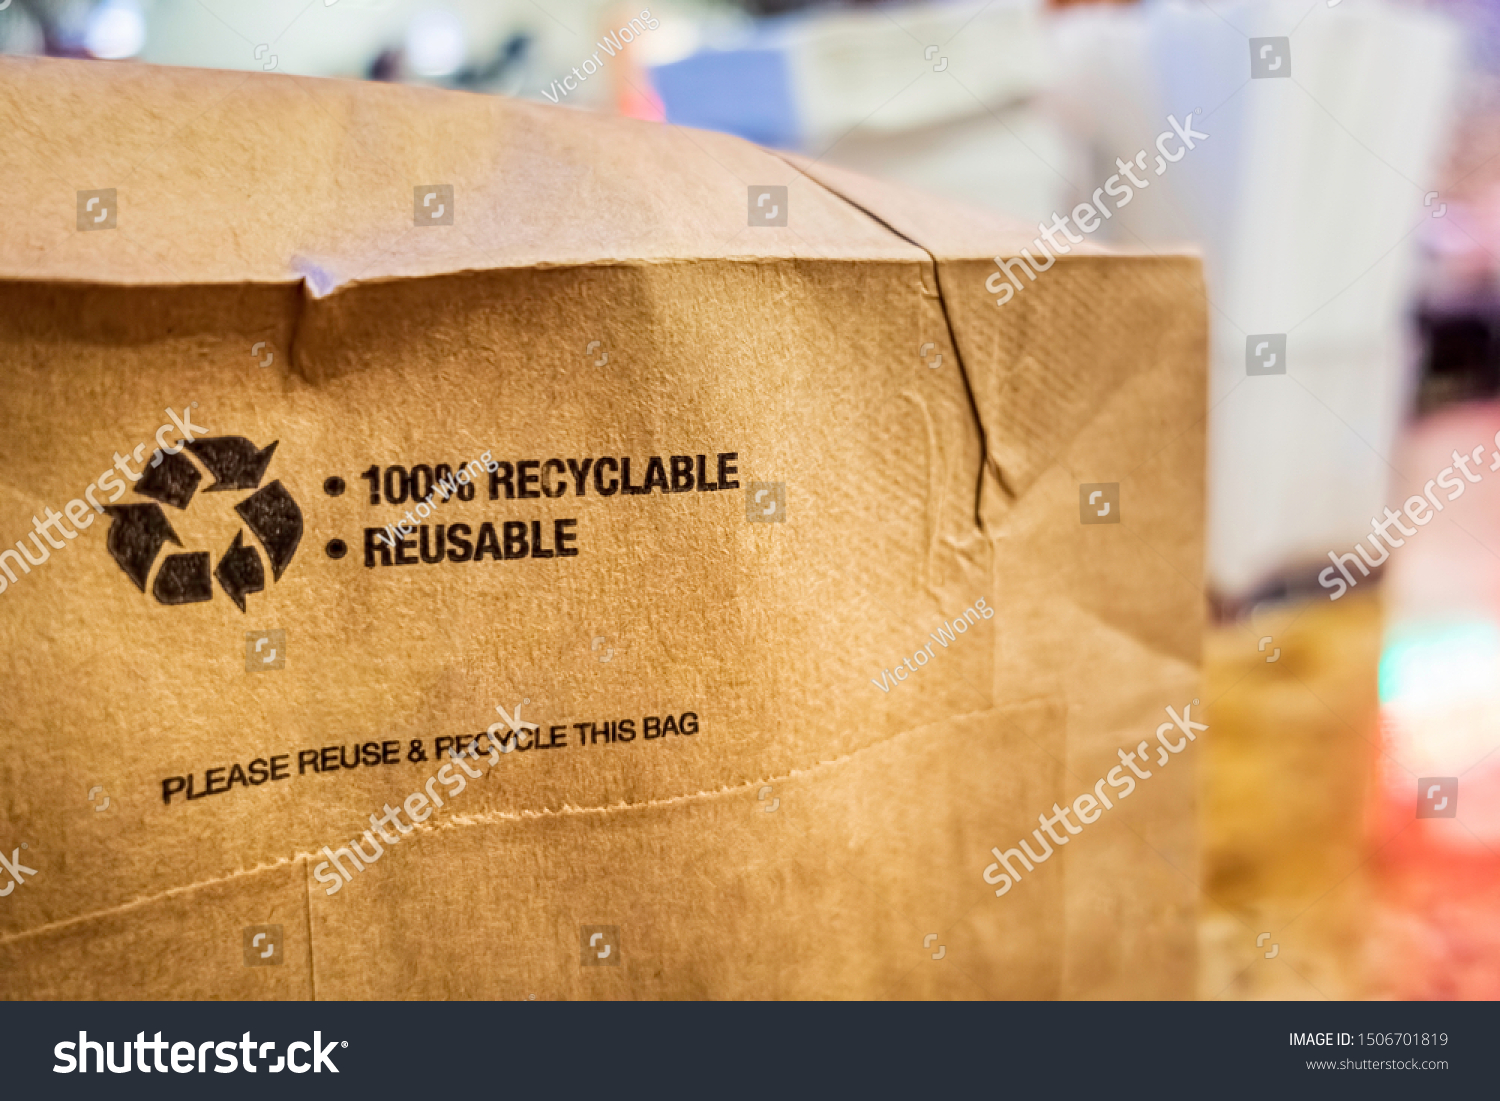 Brown paper bag that is 100% recyclable and reusable on a counter. A printed plea for user to recycle and reuse this bag as a form of packaging. #1506701819